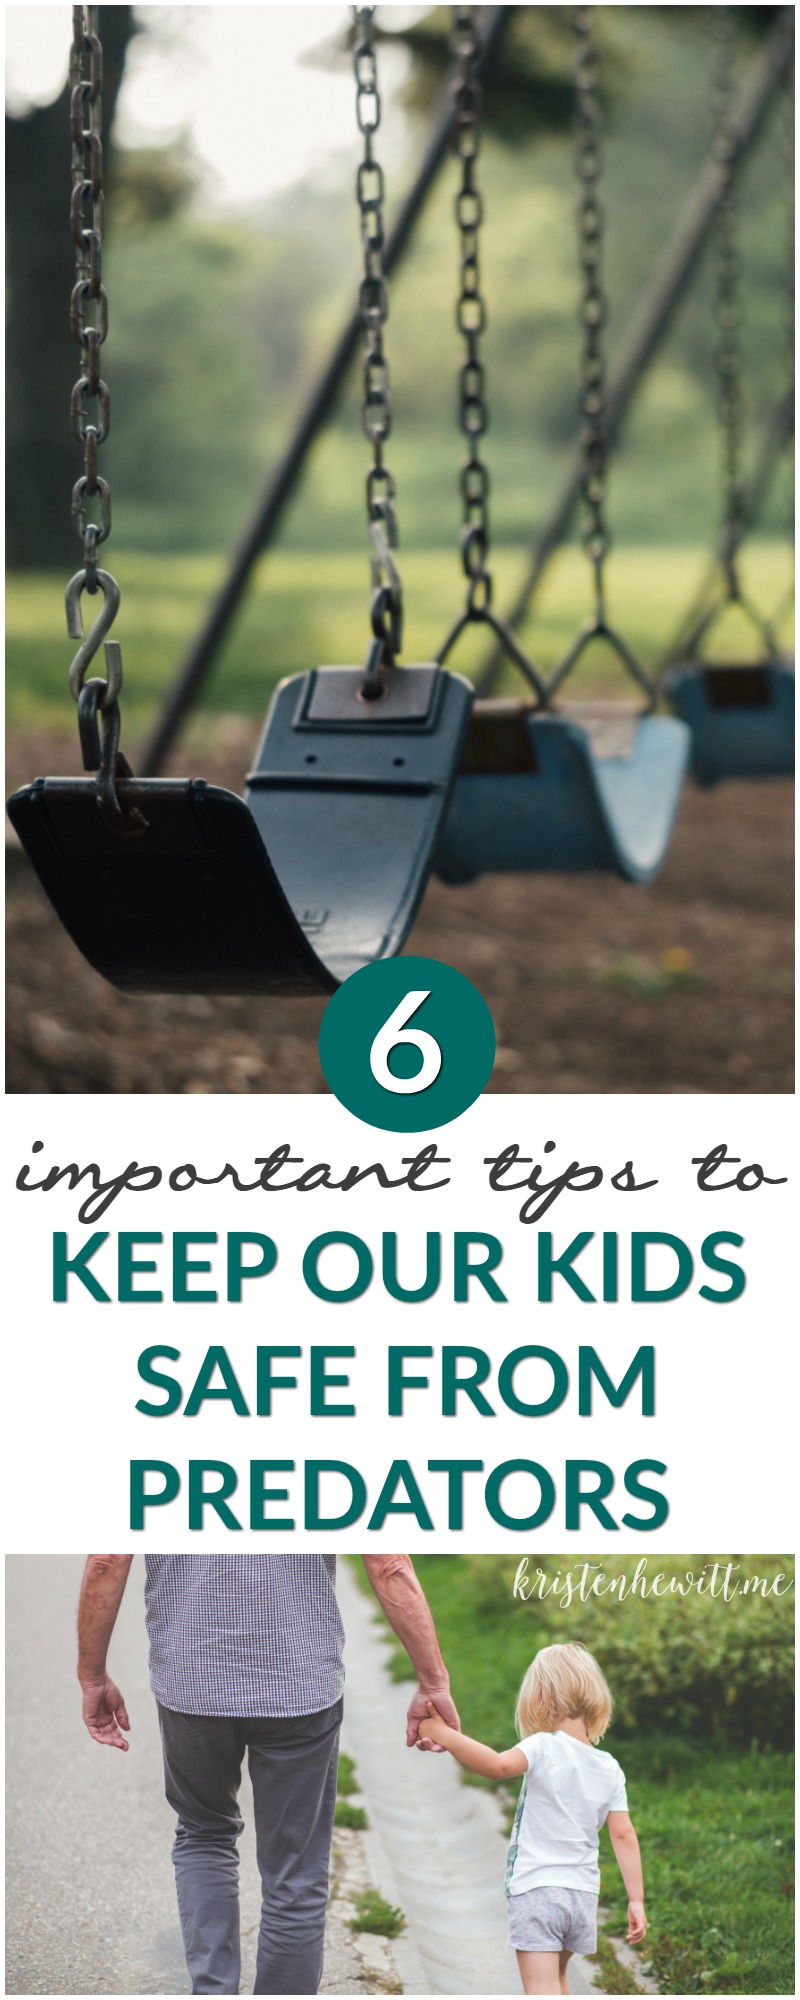 Did you know 1 in 3 girls and 1 in 5 boys will be sexually abused? Read these tips from Lauren Book and learn how to keep your kids safe from predators.